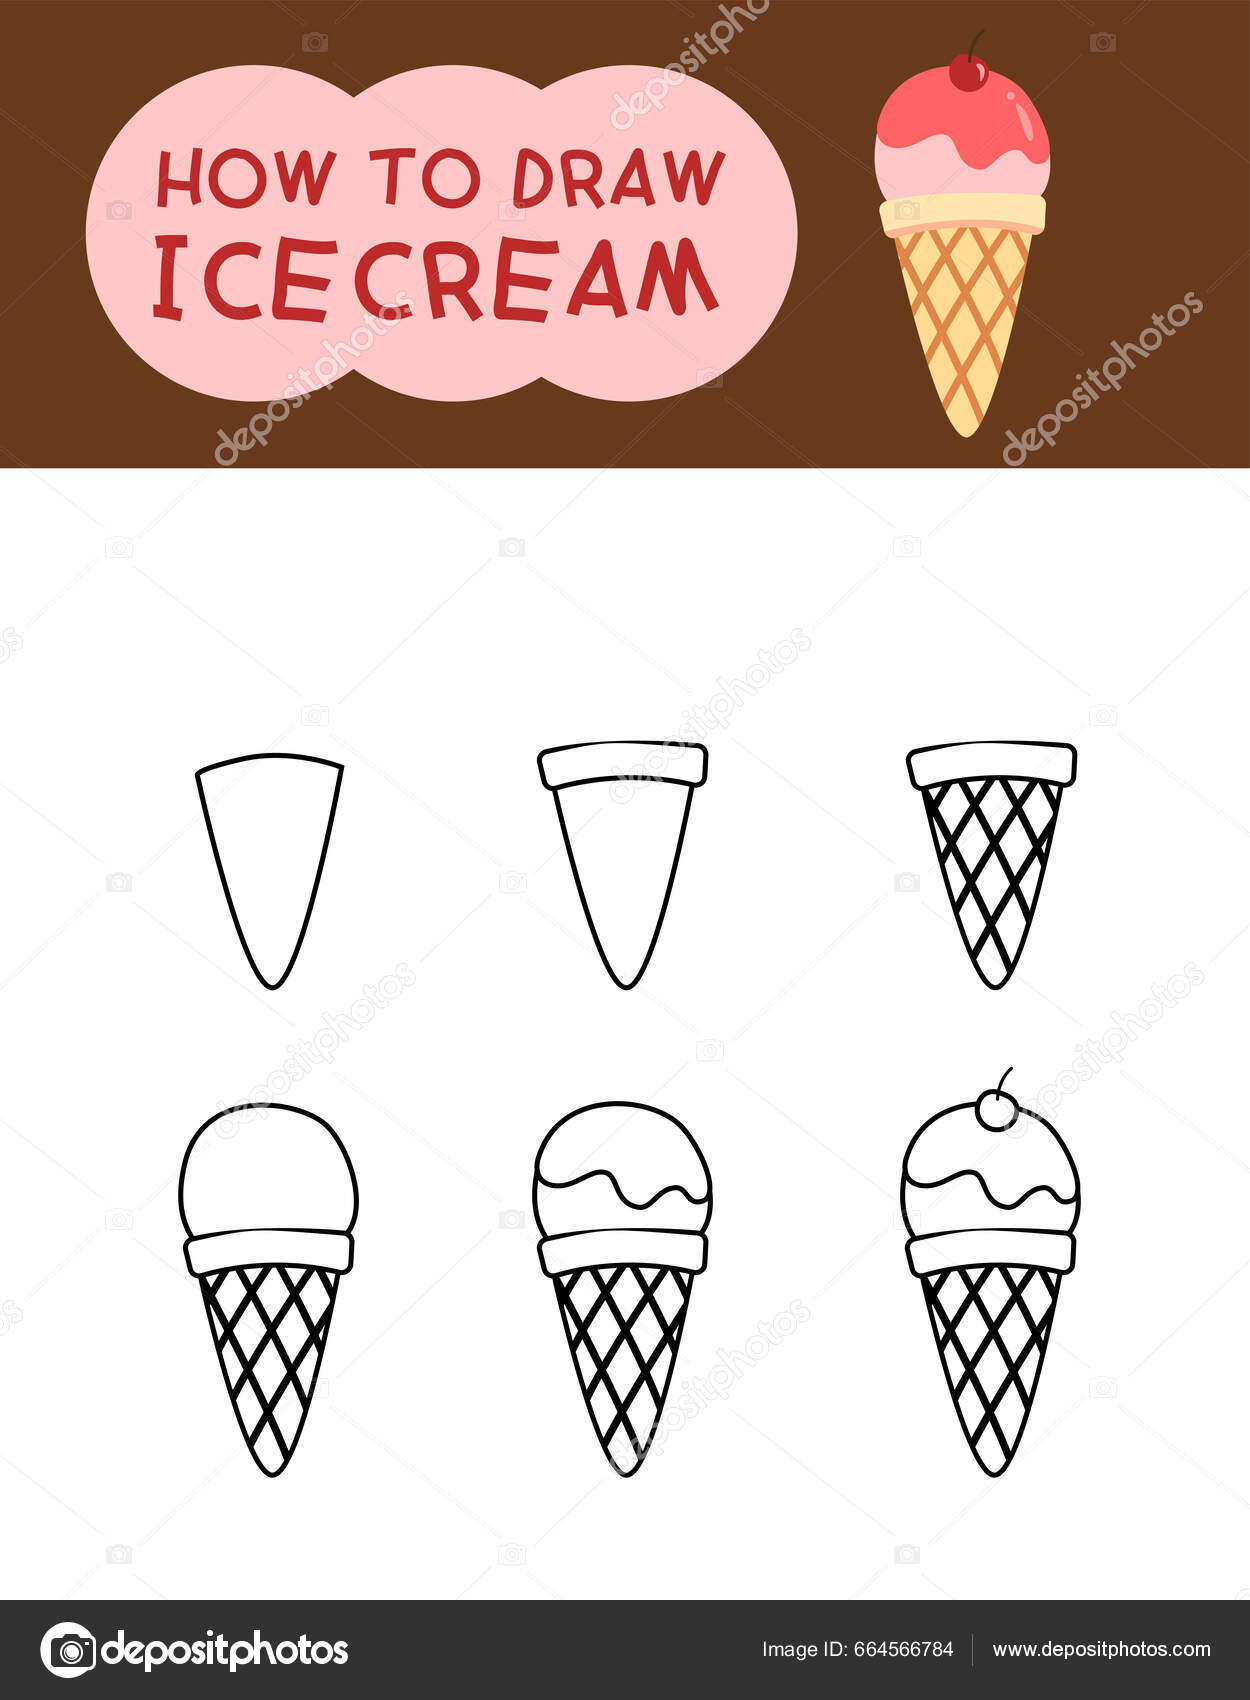 How to Draw Cartoon Ice Cream on a Cone Cute and Easy - video Dailymotion-saigonsouth.com.vn